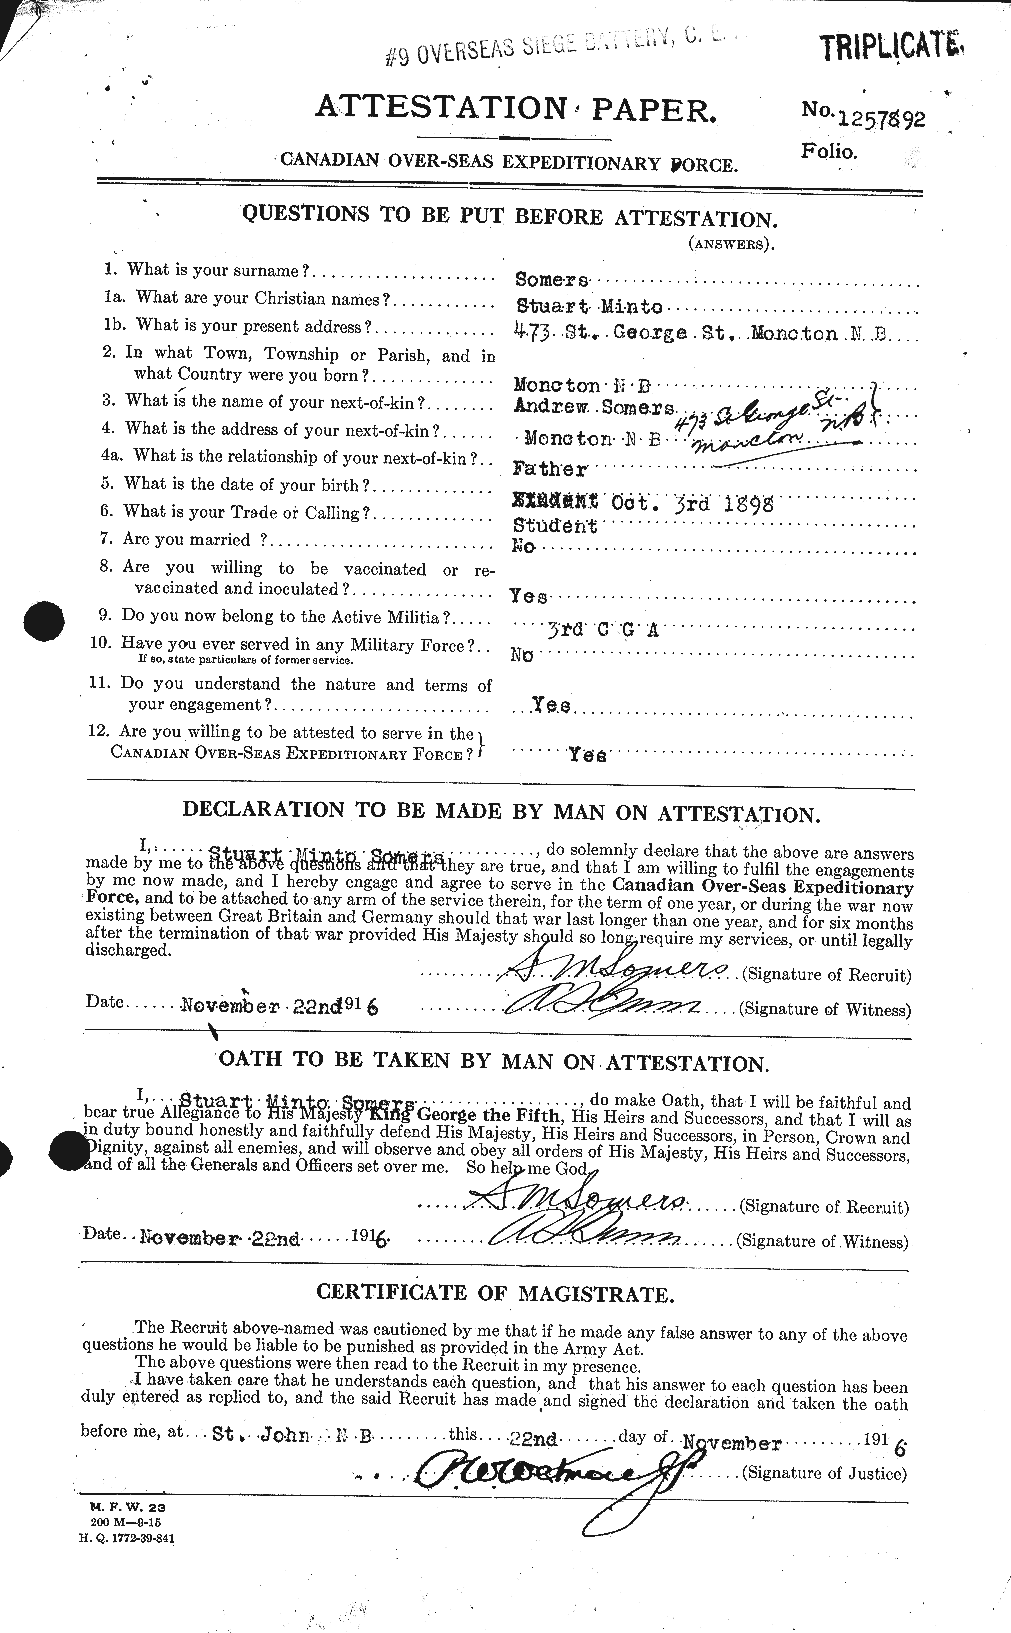 Personnel Records of the First World War - CEF 106966a